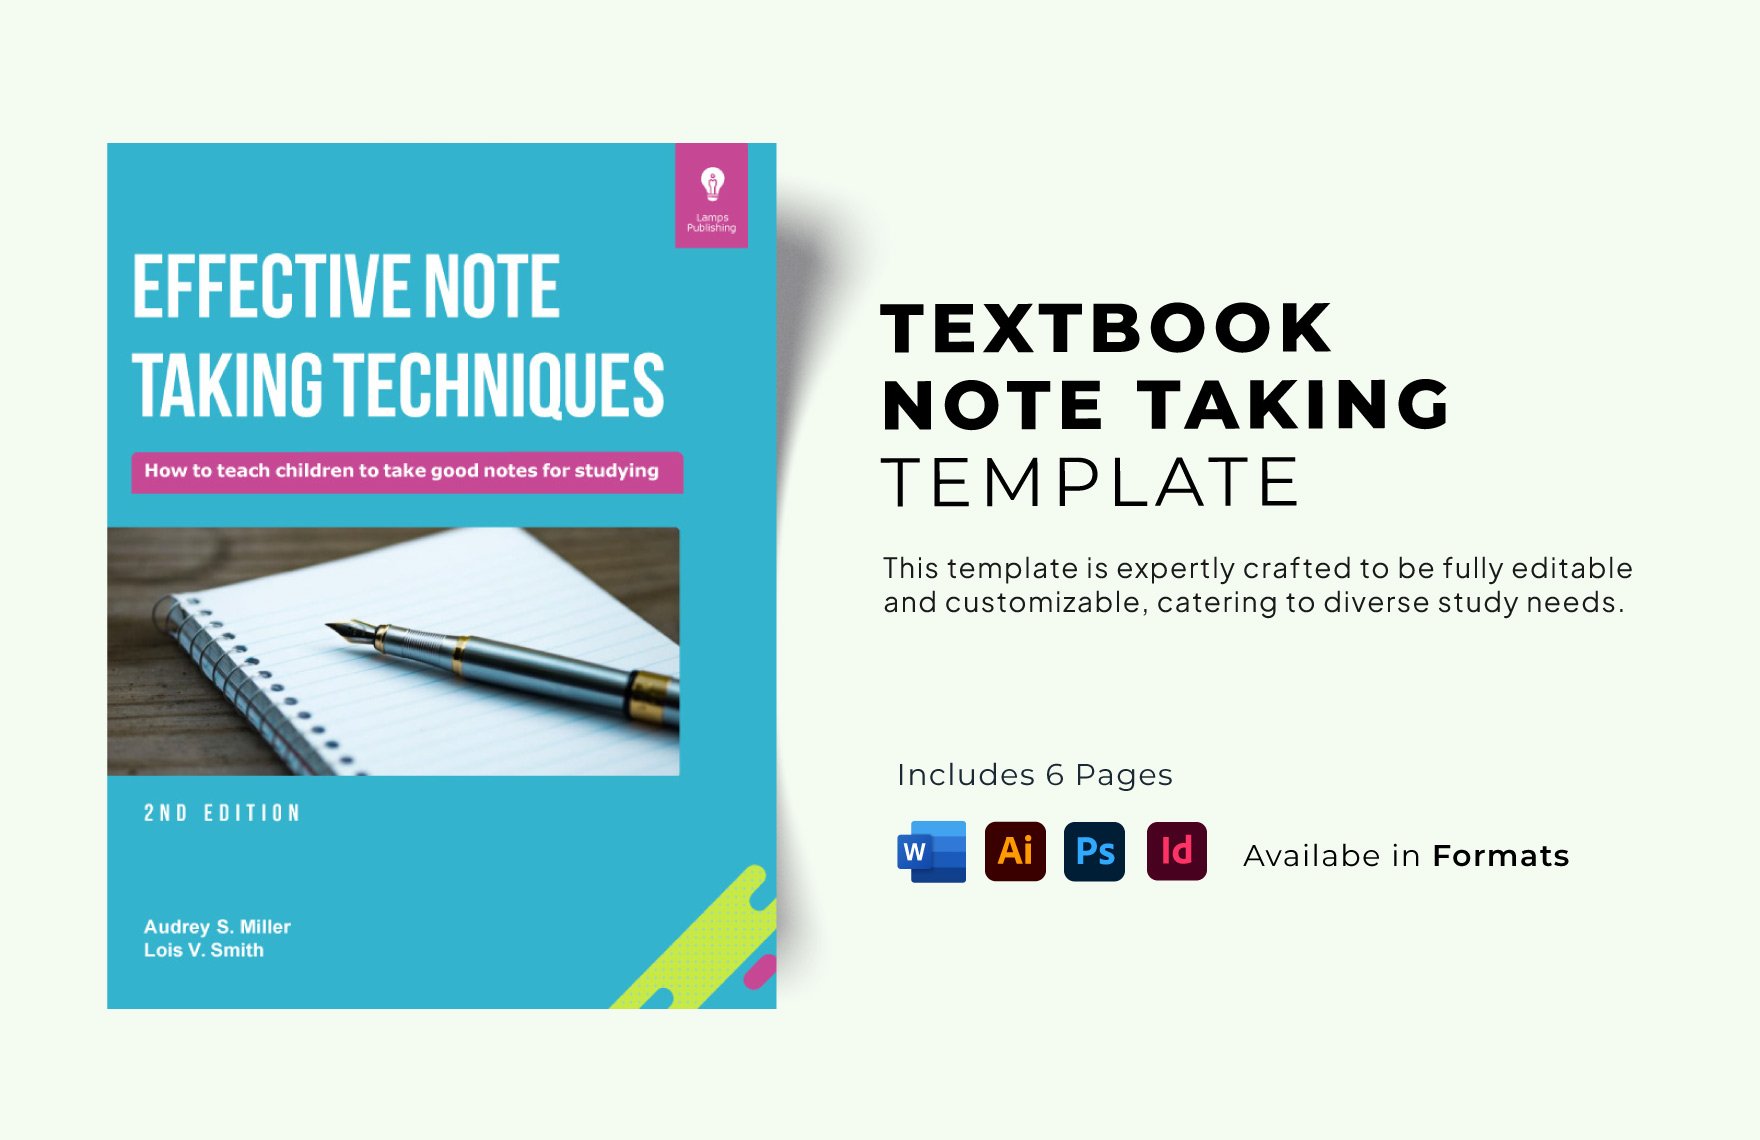 Textbook Note Taking Template